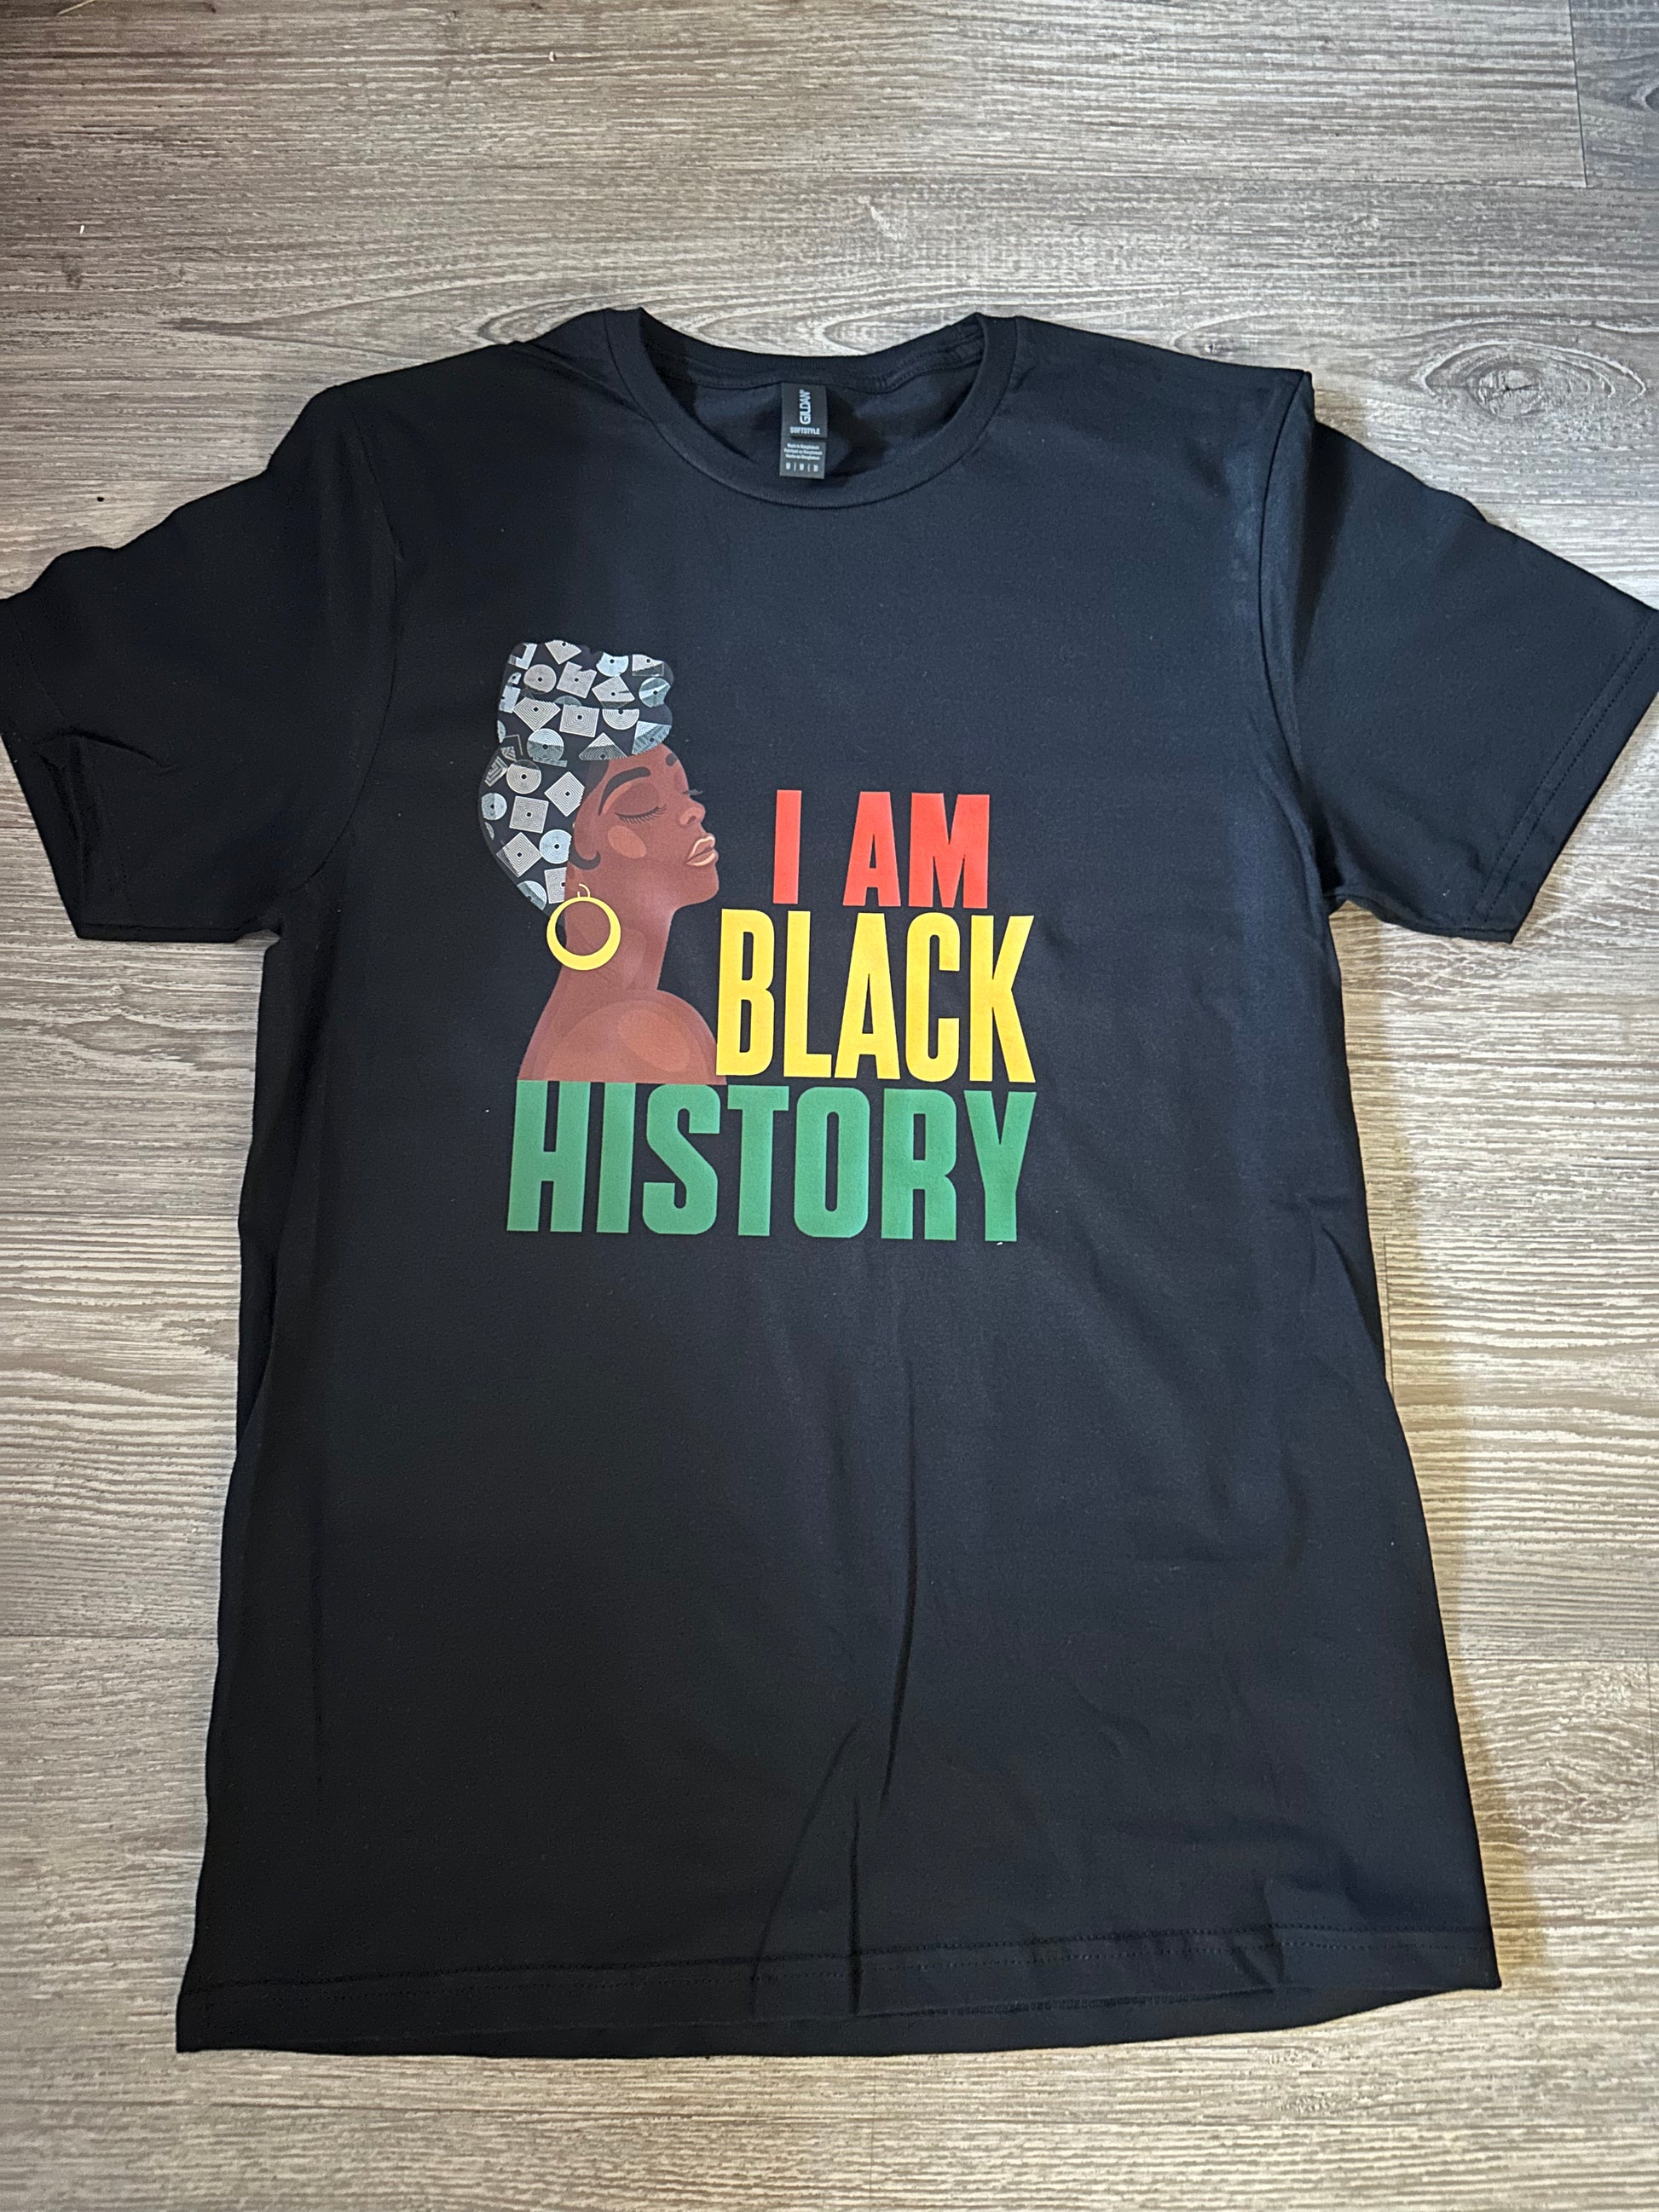 I am black history black tshirt round neck with a dark brown skin tone woman wearing different shades of blue headwrap with gold earring with text I am in red Black in yellow History in green all caps. Melanin Apparel. I am black history. 